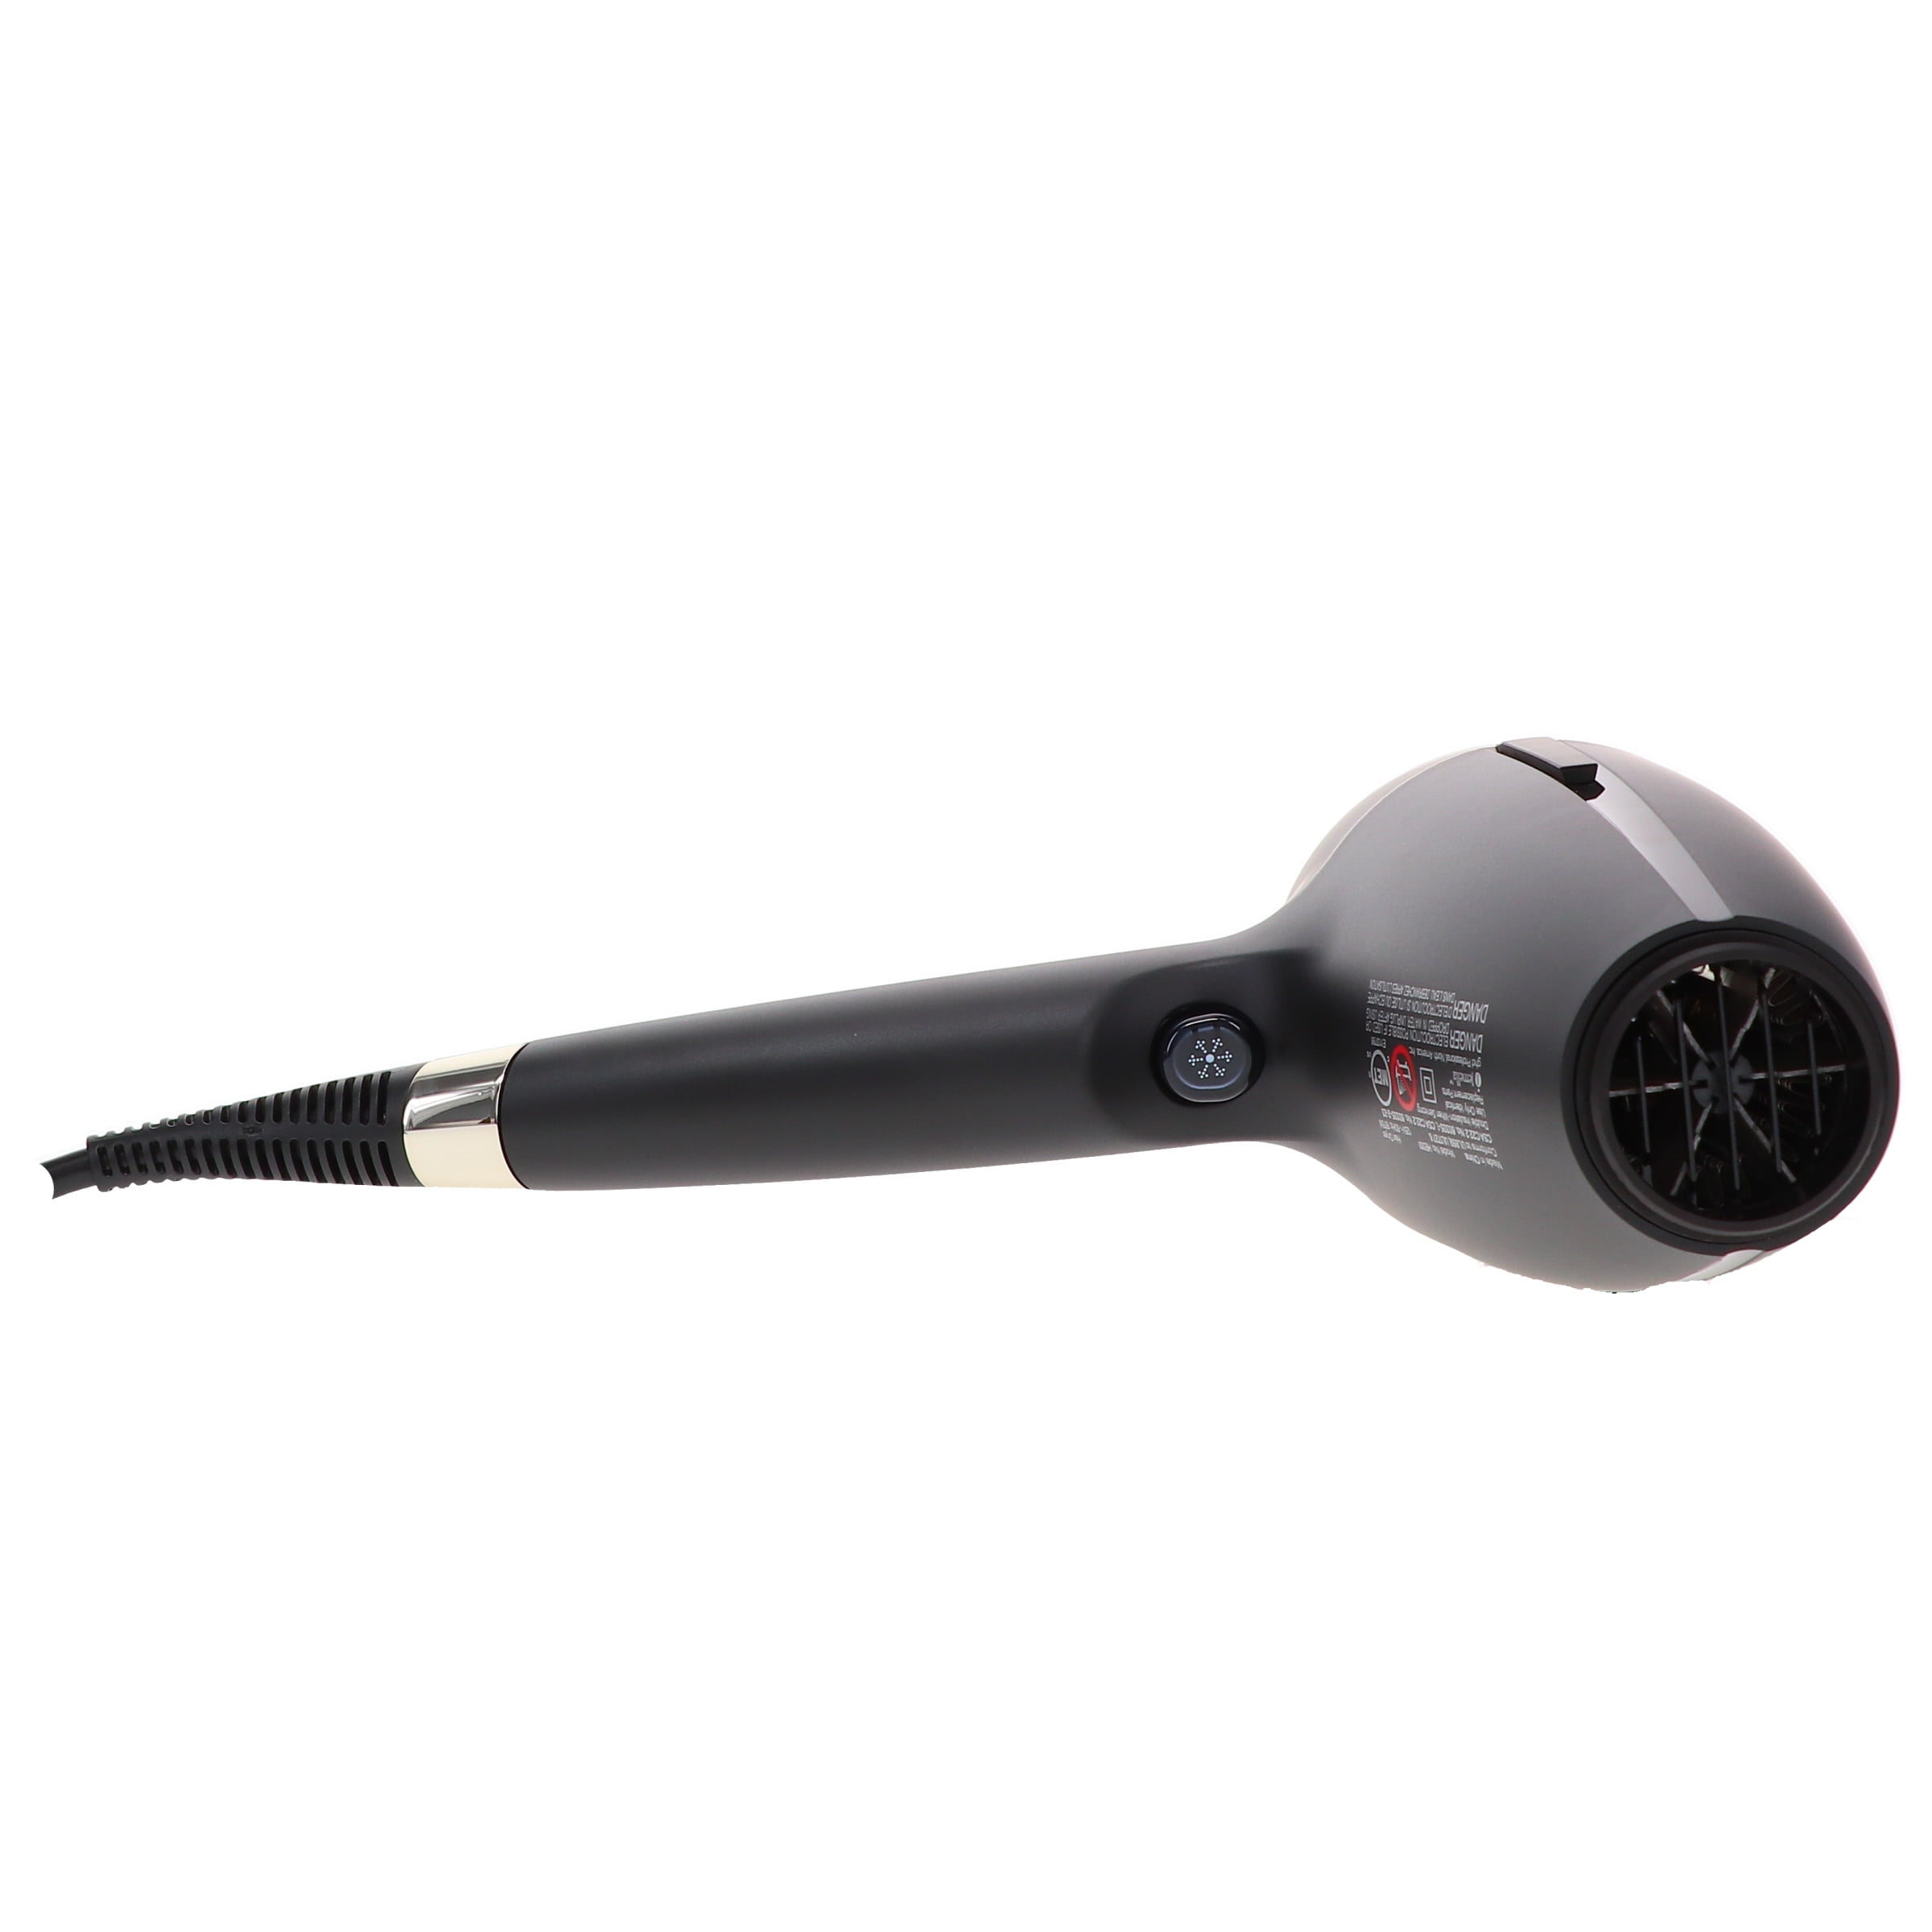 GHD Helios Ergonomic Design Hair Dryer with Concentrator, Black -  